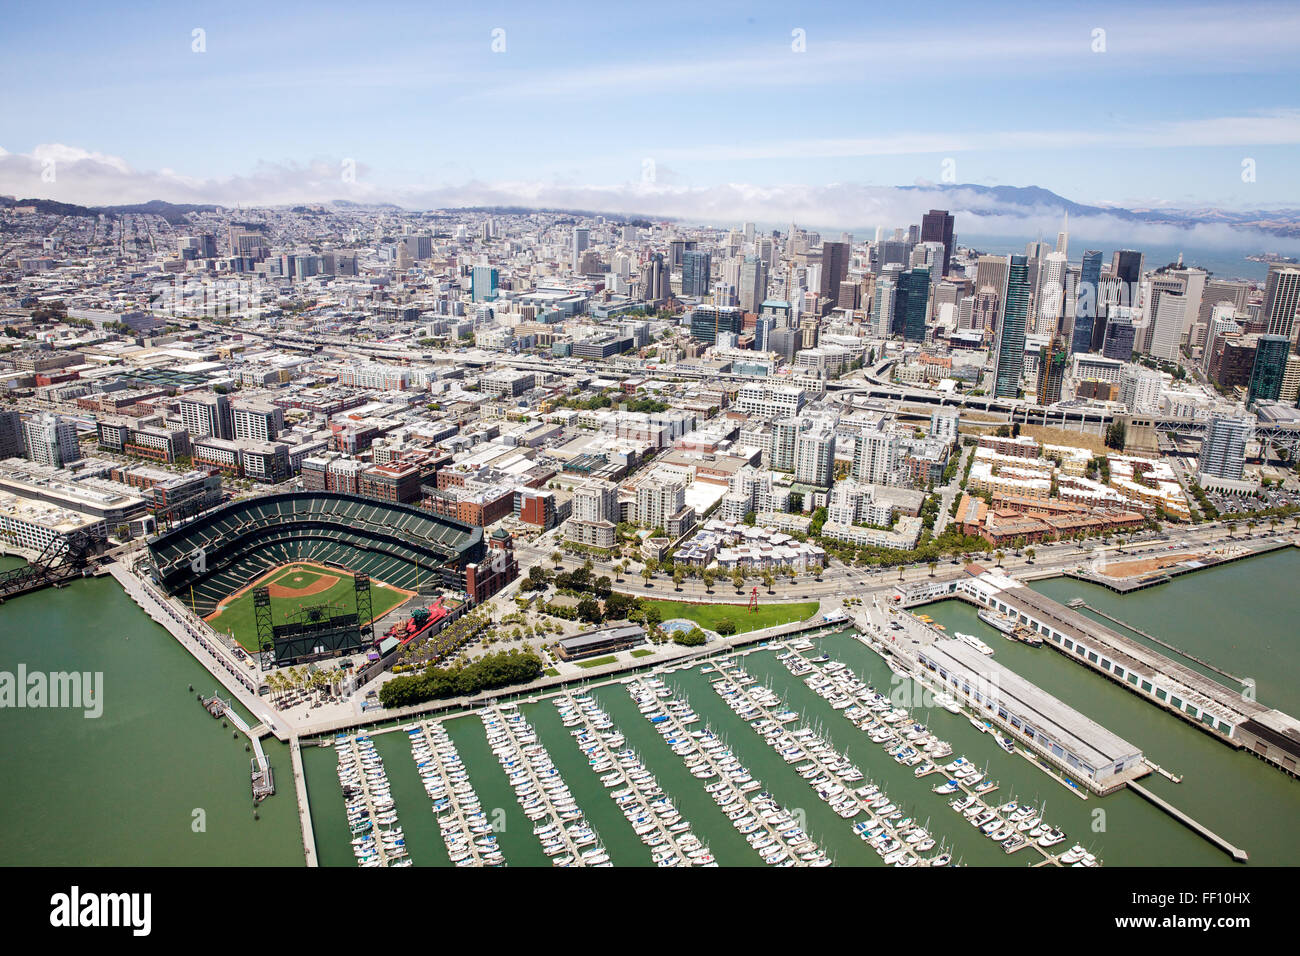 Size: 8 x 10 AT&T Park San Francisco Giants Aerial City View Photo